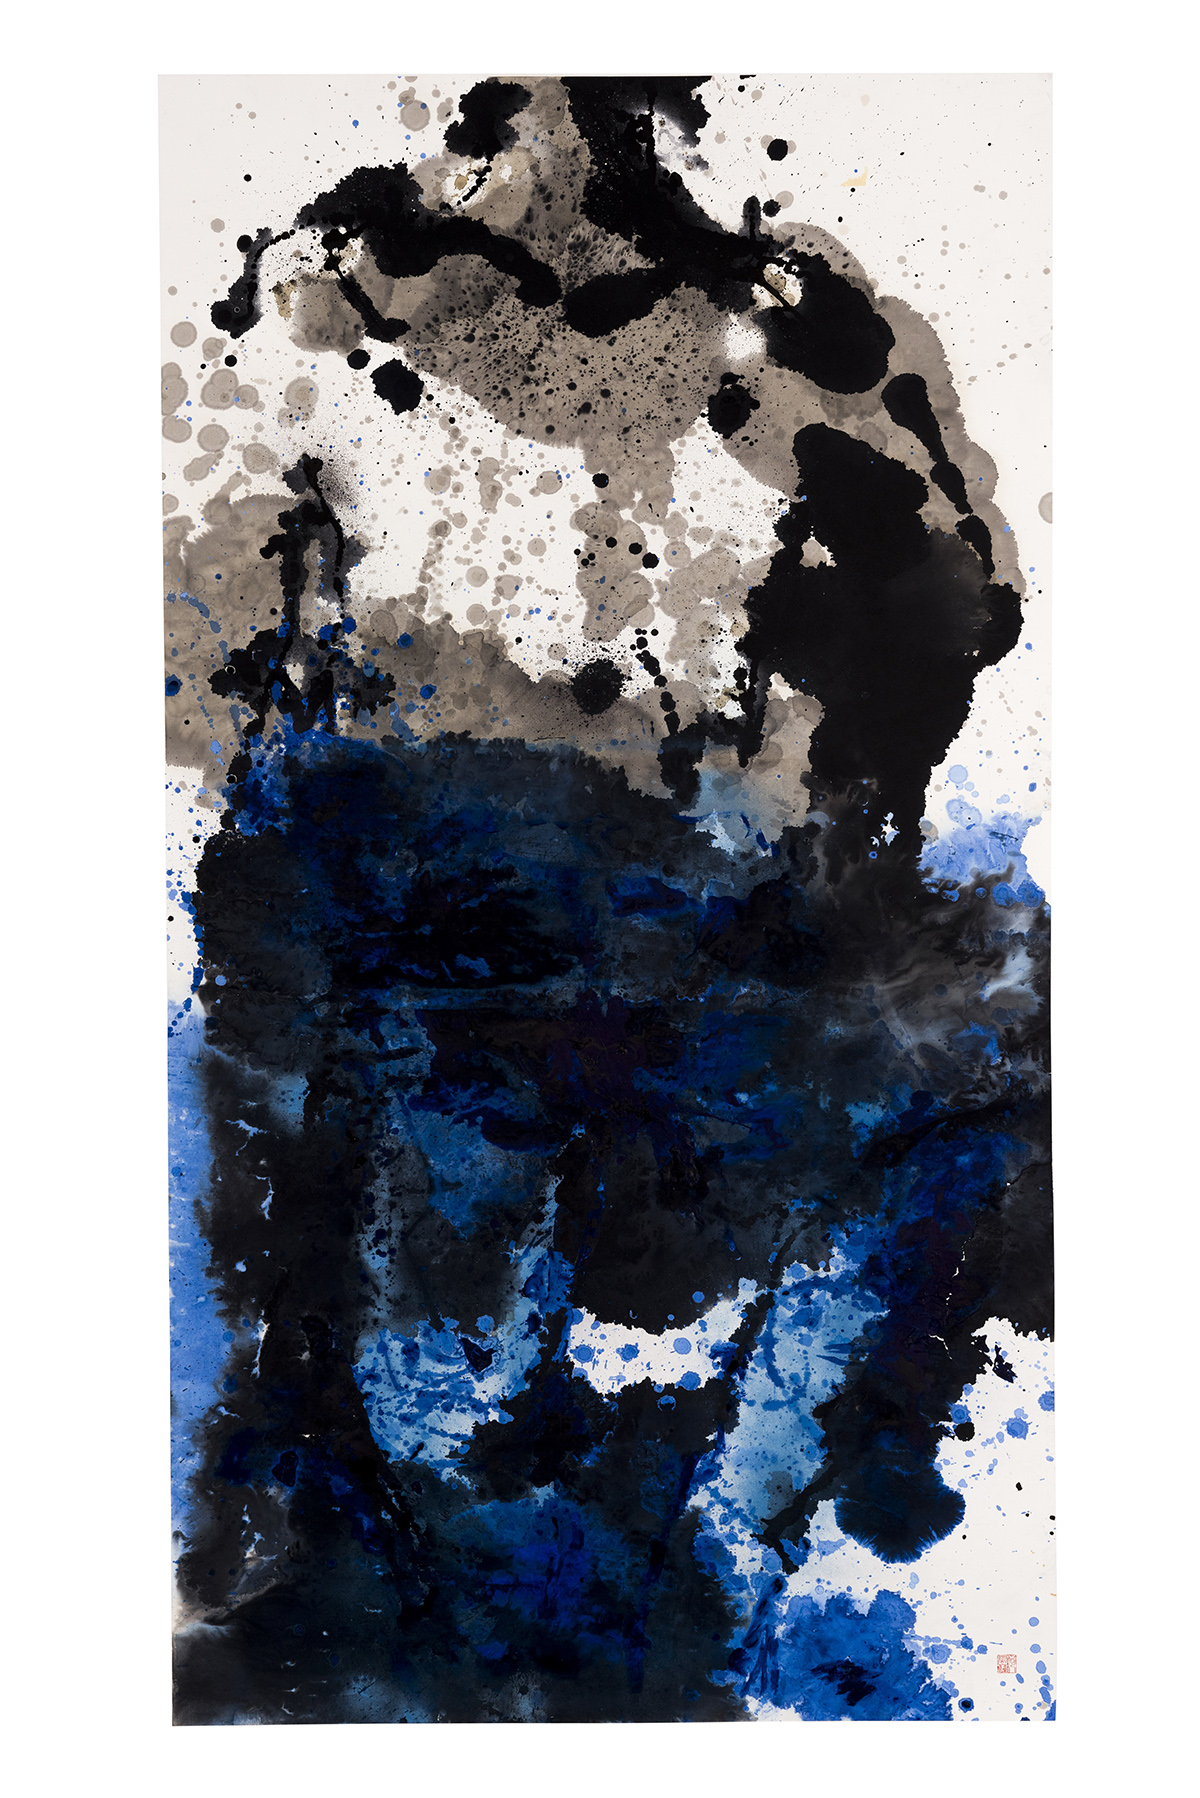 Ink painting showing a figure in blue and black